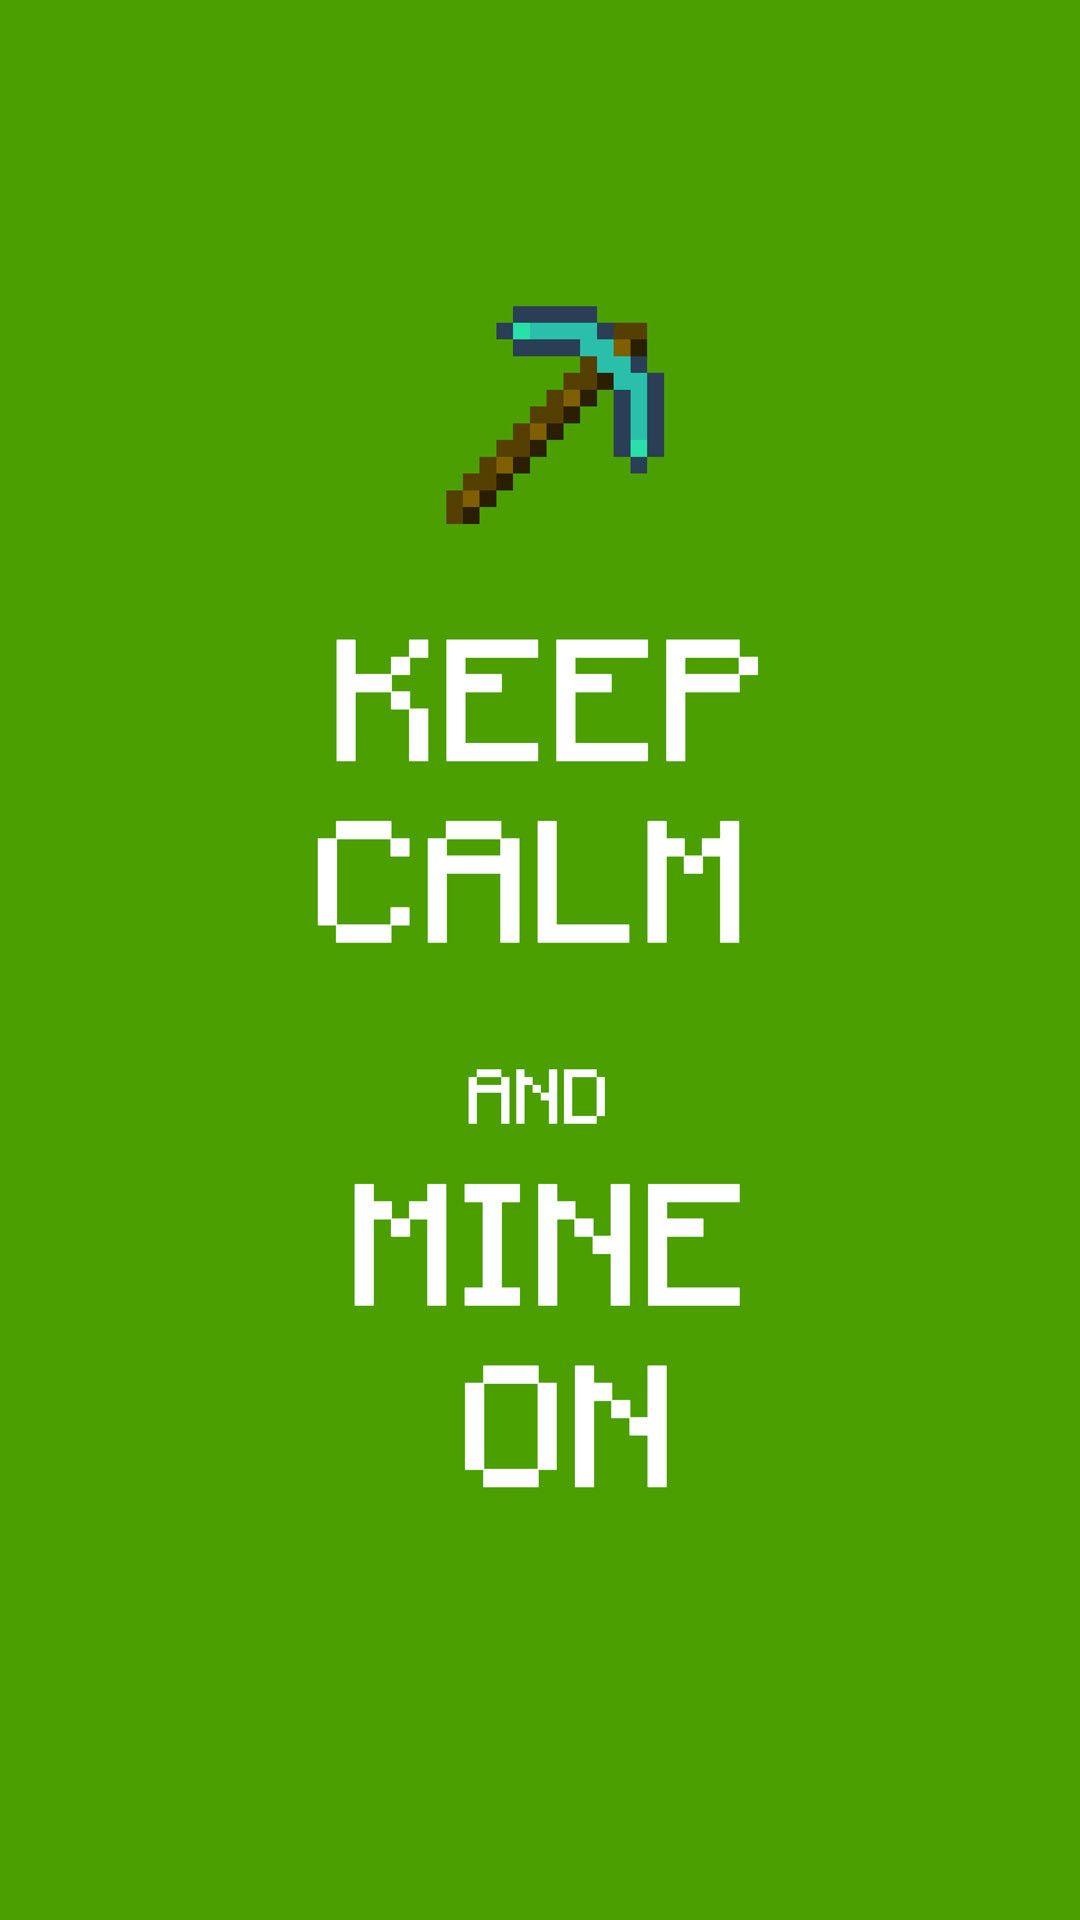 1080x1920 Keep Calm And Carry On Hd Iphone Wallpaper : Keep calm wallpaper hd 1920